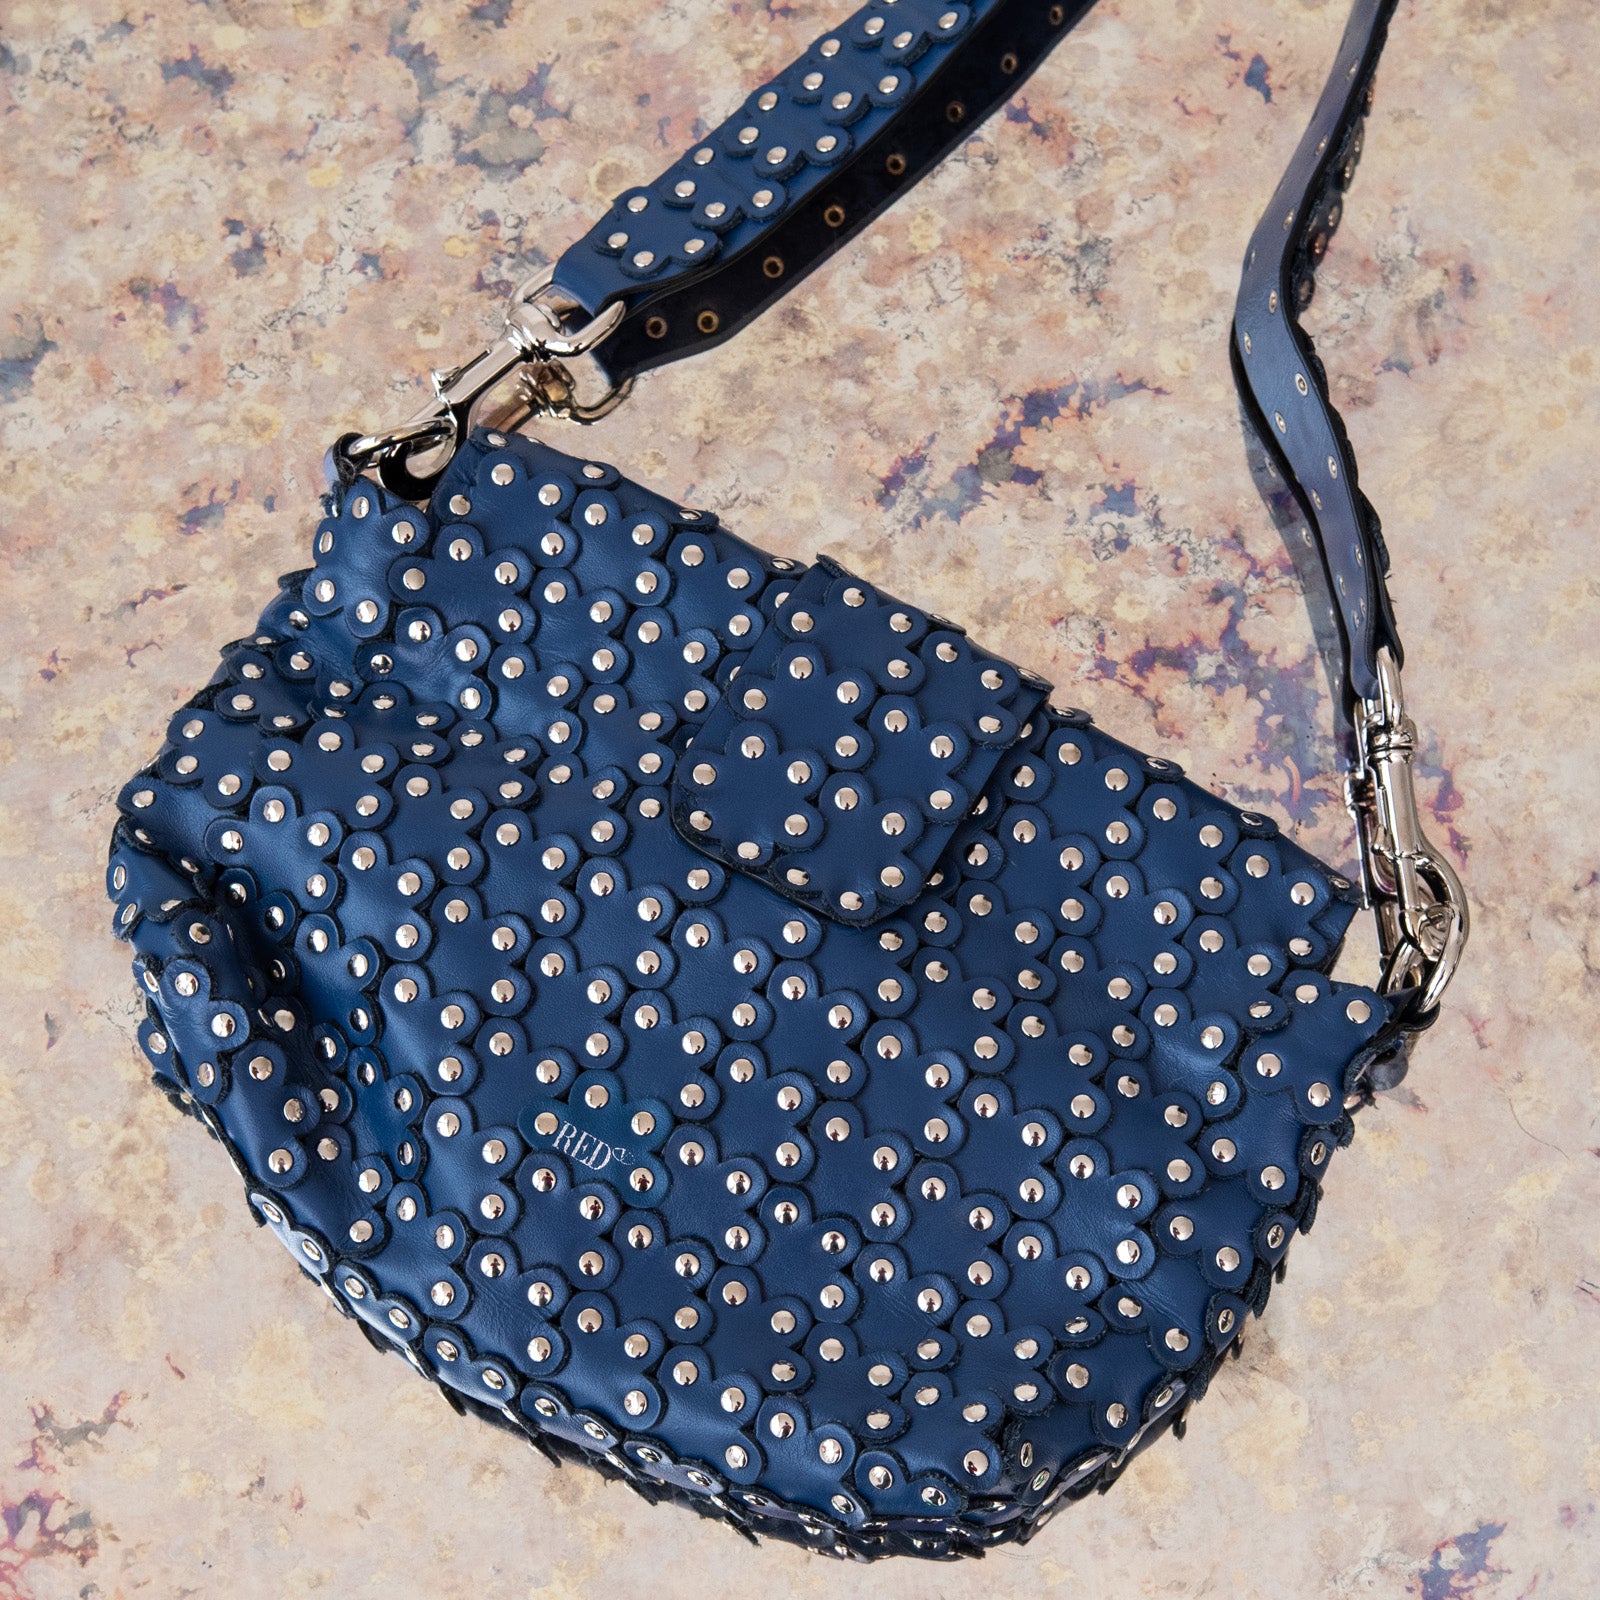 Red Valentino Blue Buckle Bag - Image 6 of 8